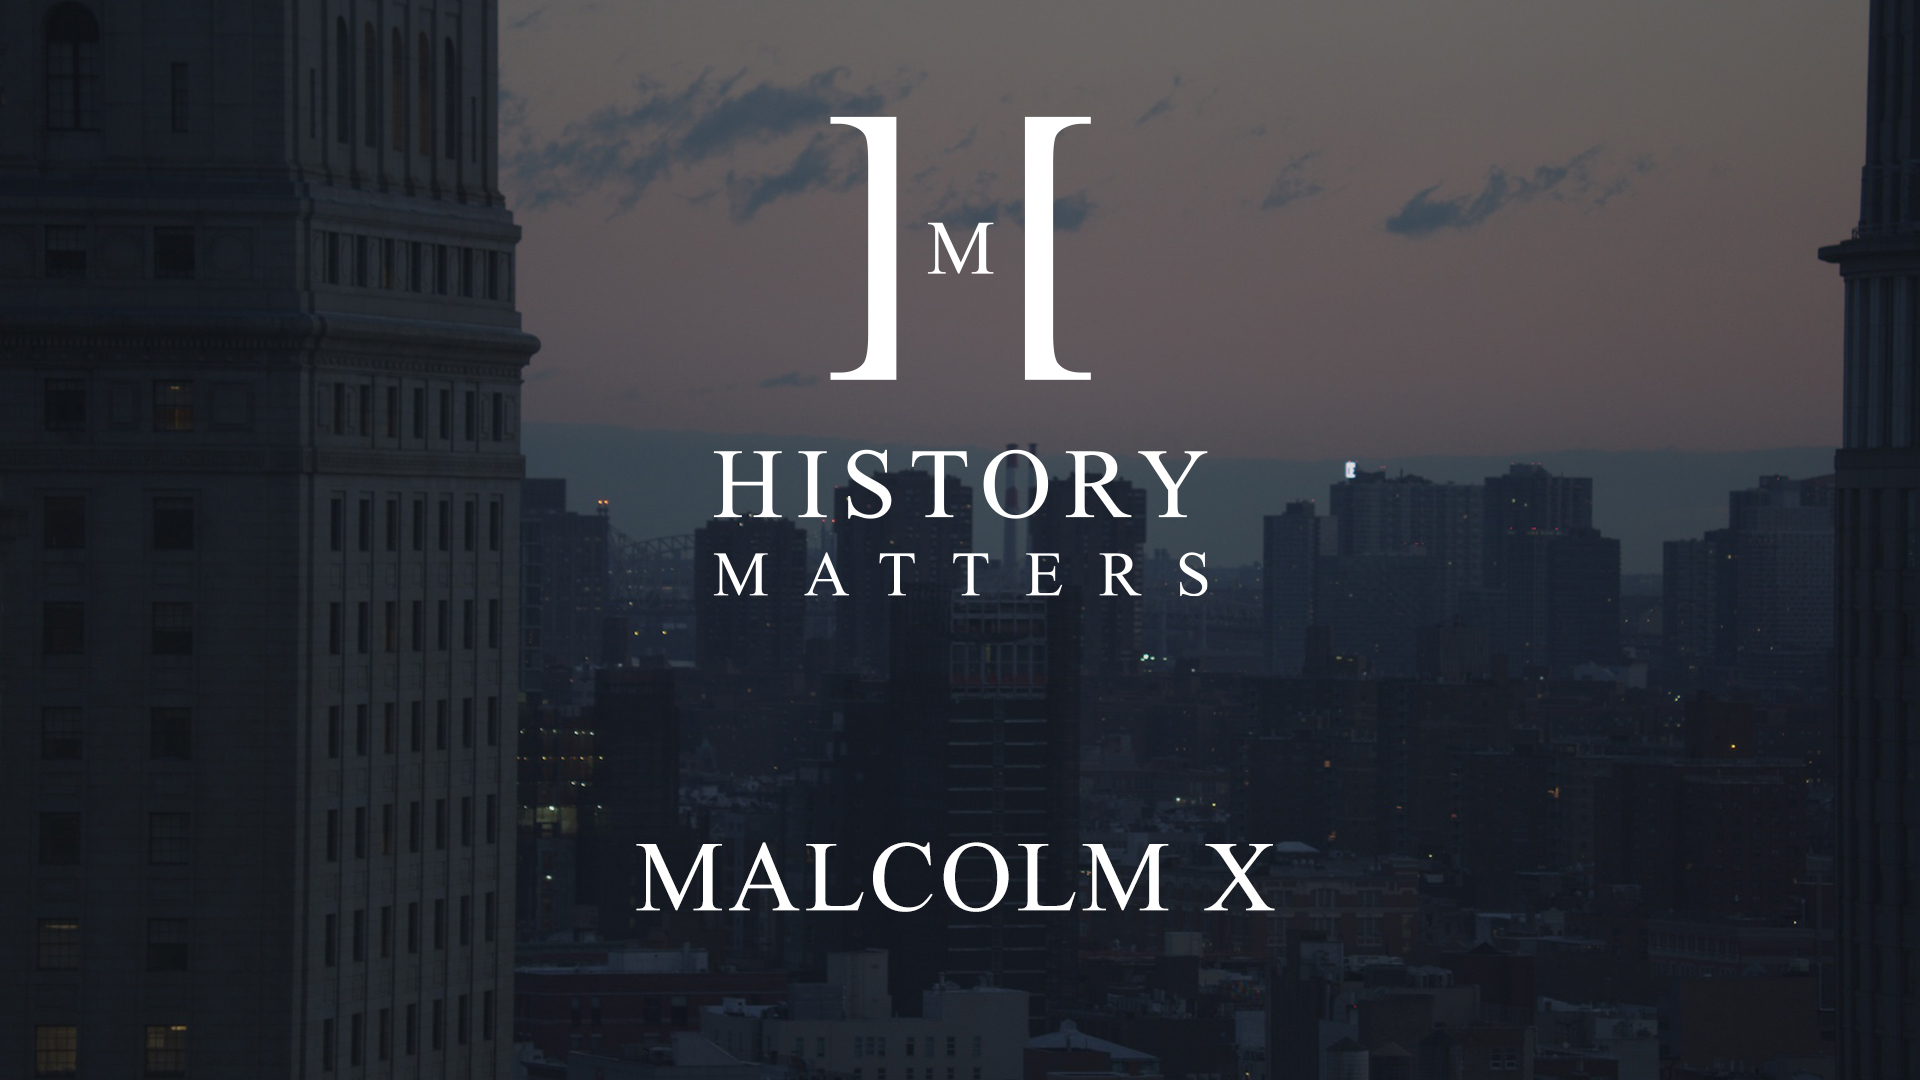 White HM Malcolm X logo with dimmed background showing an aerial view of a city at dusk